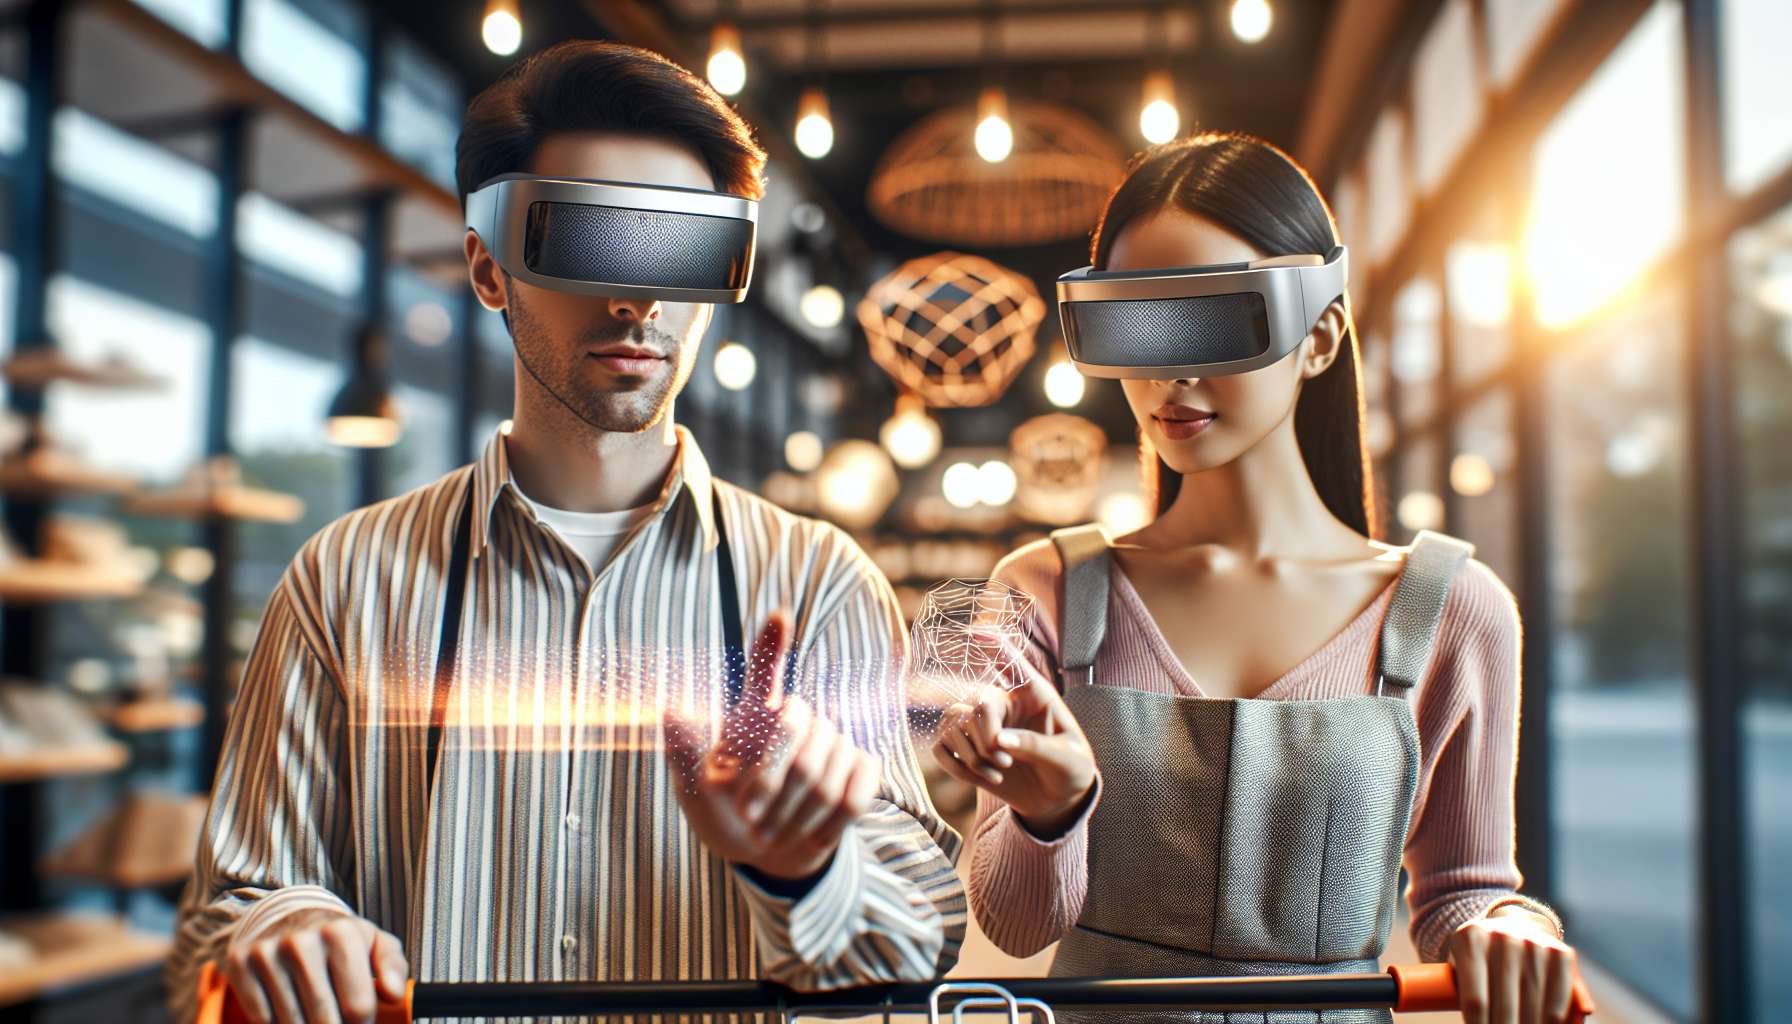 The Cutting Edge: New Augmented Reality Technologies in Retail